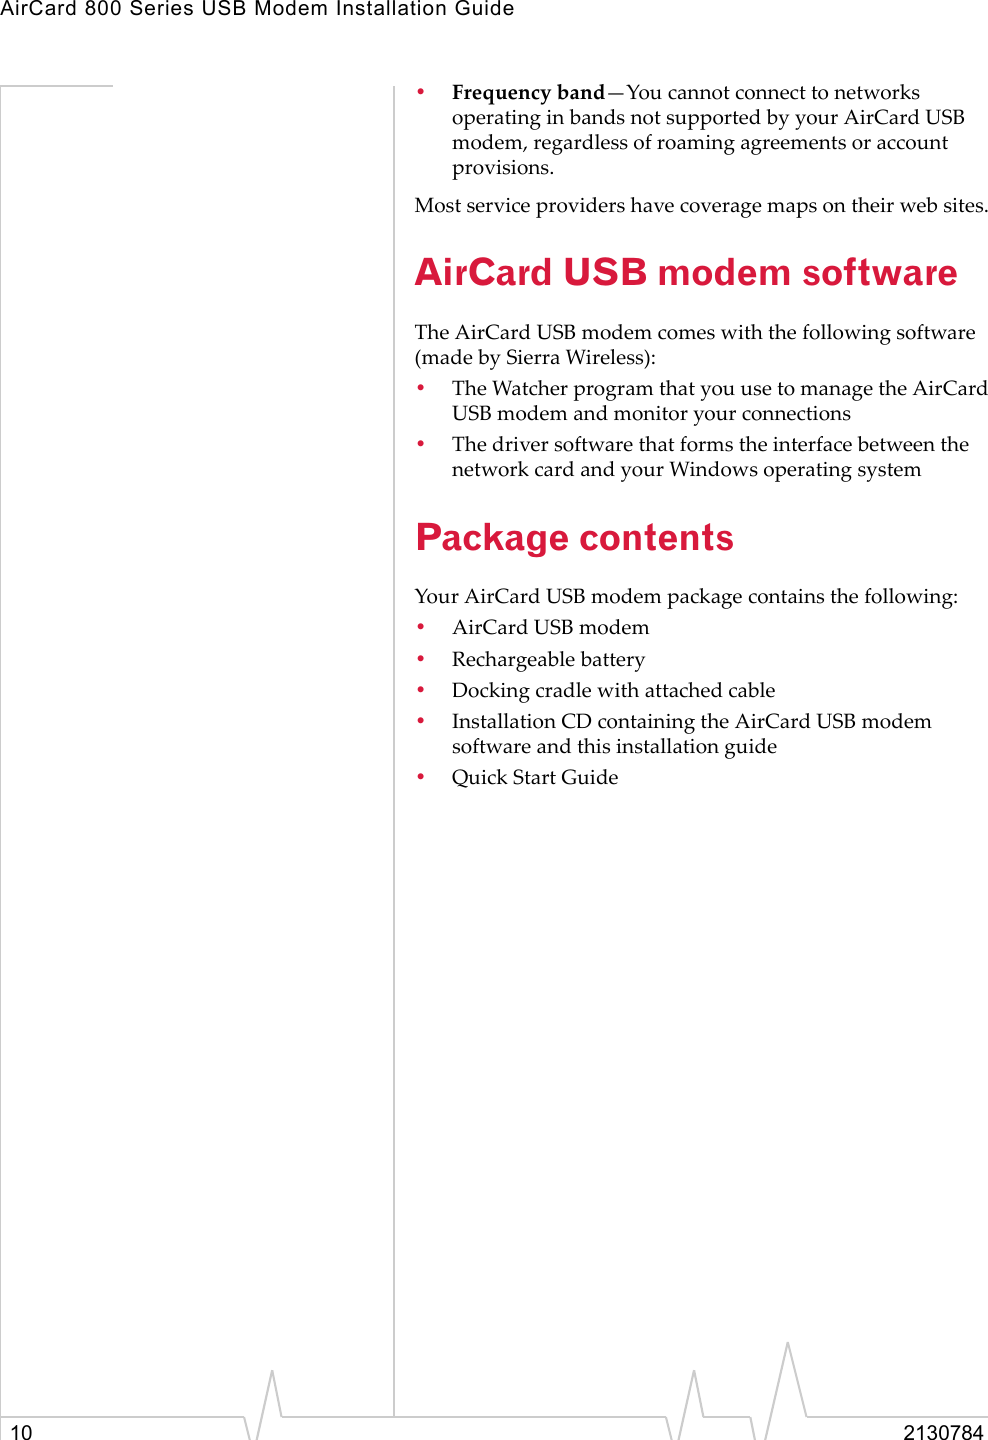 AirCard 800 Series USB Modem Installation Guide10 2130784•Frequencyband—YoucannotconnecttonetworksoperatinginbandsnotsupportedbyyourAirCardUSBmodem,regardlessofroamingagreementsoraccountprovisions.Mostserviceprovidershavecoveragemapsontheirwebsites.AirCard USB modem softwareTheAirCardUSBmodemcomeswiththefollowingsoftware(madebySierraWireless):•TheWatcherprogramthatyouusetomanagetheAirCardUSBmodemandmonitoryourconnections•ThedriversoftwarethatformstheinterfacebetweenthenetworkcardandyourWindowsoperatingsystemPackage contentsYourAirCardUSBmodempackagecontainsthefollowing:•AirCardUSBmodem•Rechargeablebattery•Dockingcradlewithattachedcable•InstallationCDcontainingtheAirCardUSBmodemsoftwareandthisinstallationguide•QuickStartGuide